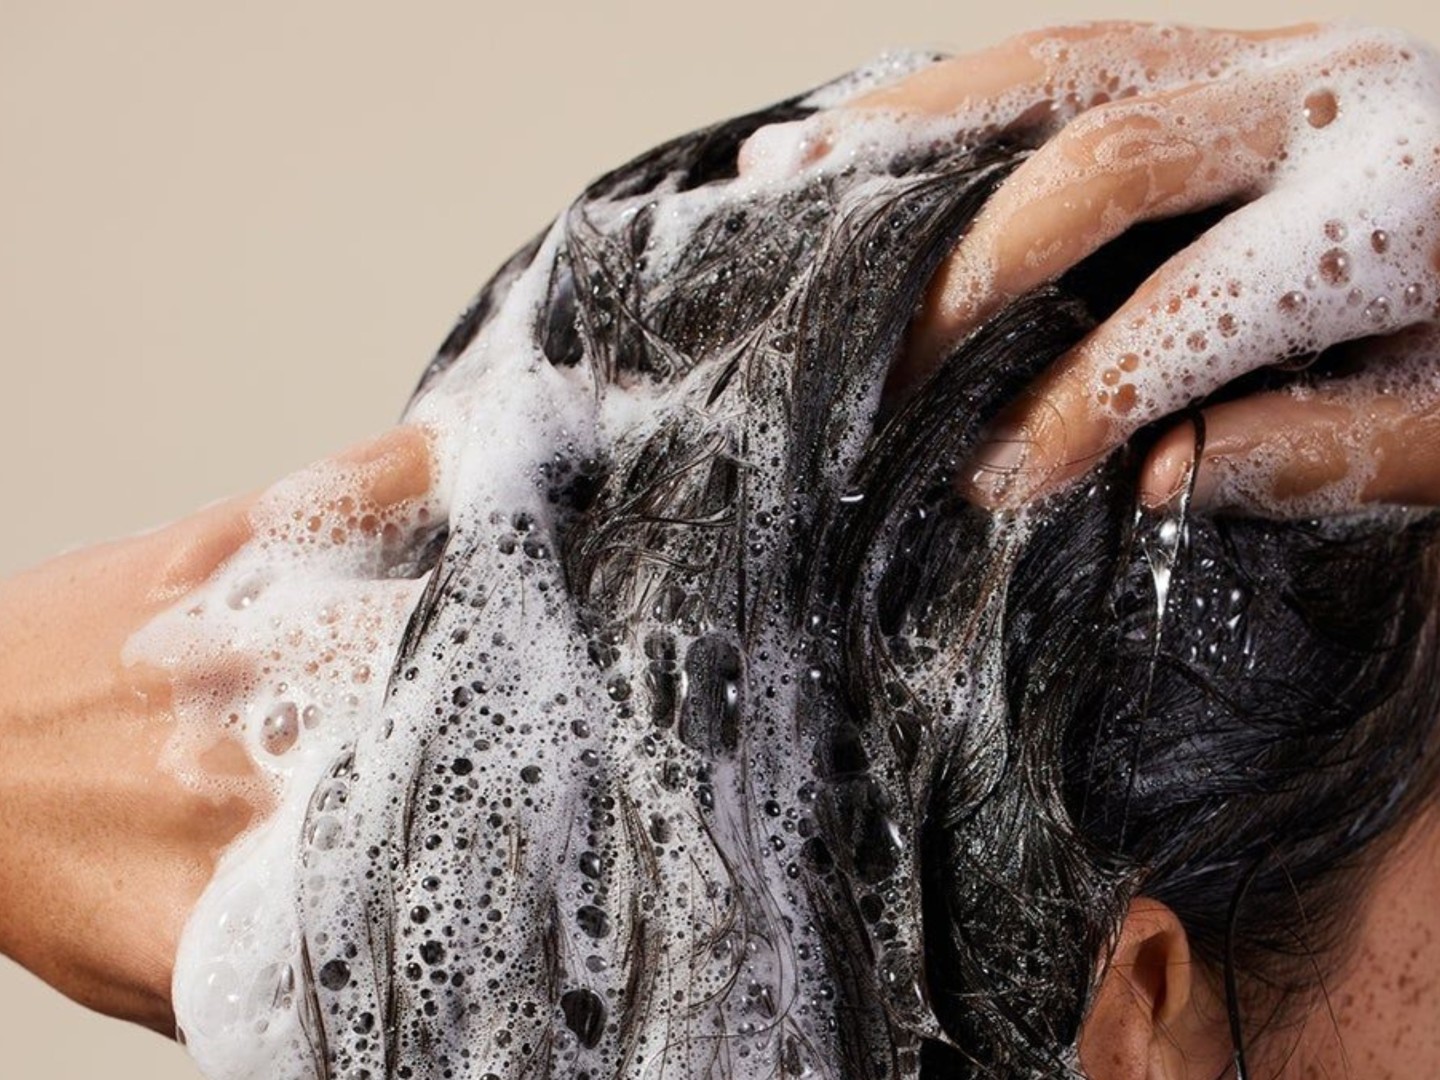 How to Check if Shampoo Is Sulfate-Free?